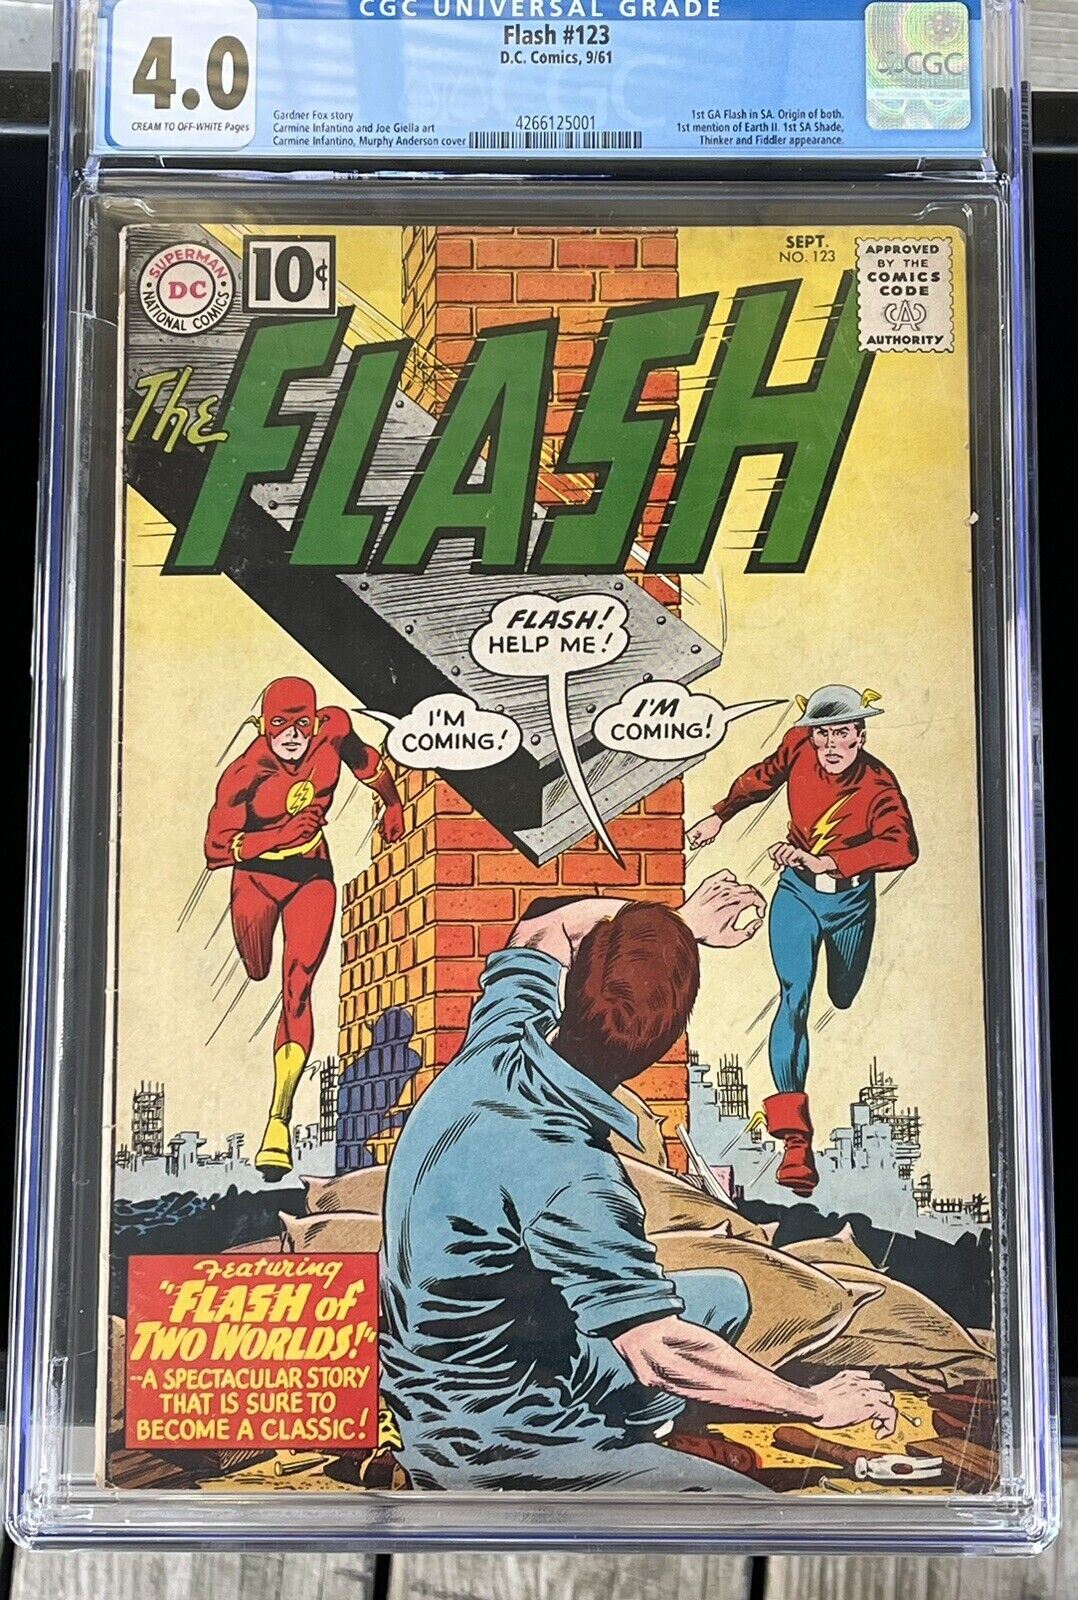 FLASH 123 - CGC VG 4.0 - 1ST SILVER AGE APPEARANCE OF GOLDEN AGE FLASH Key Issue